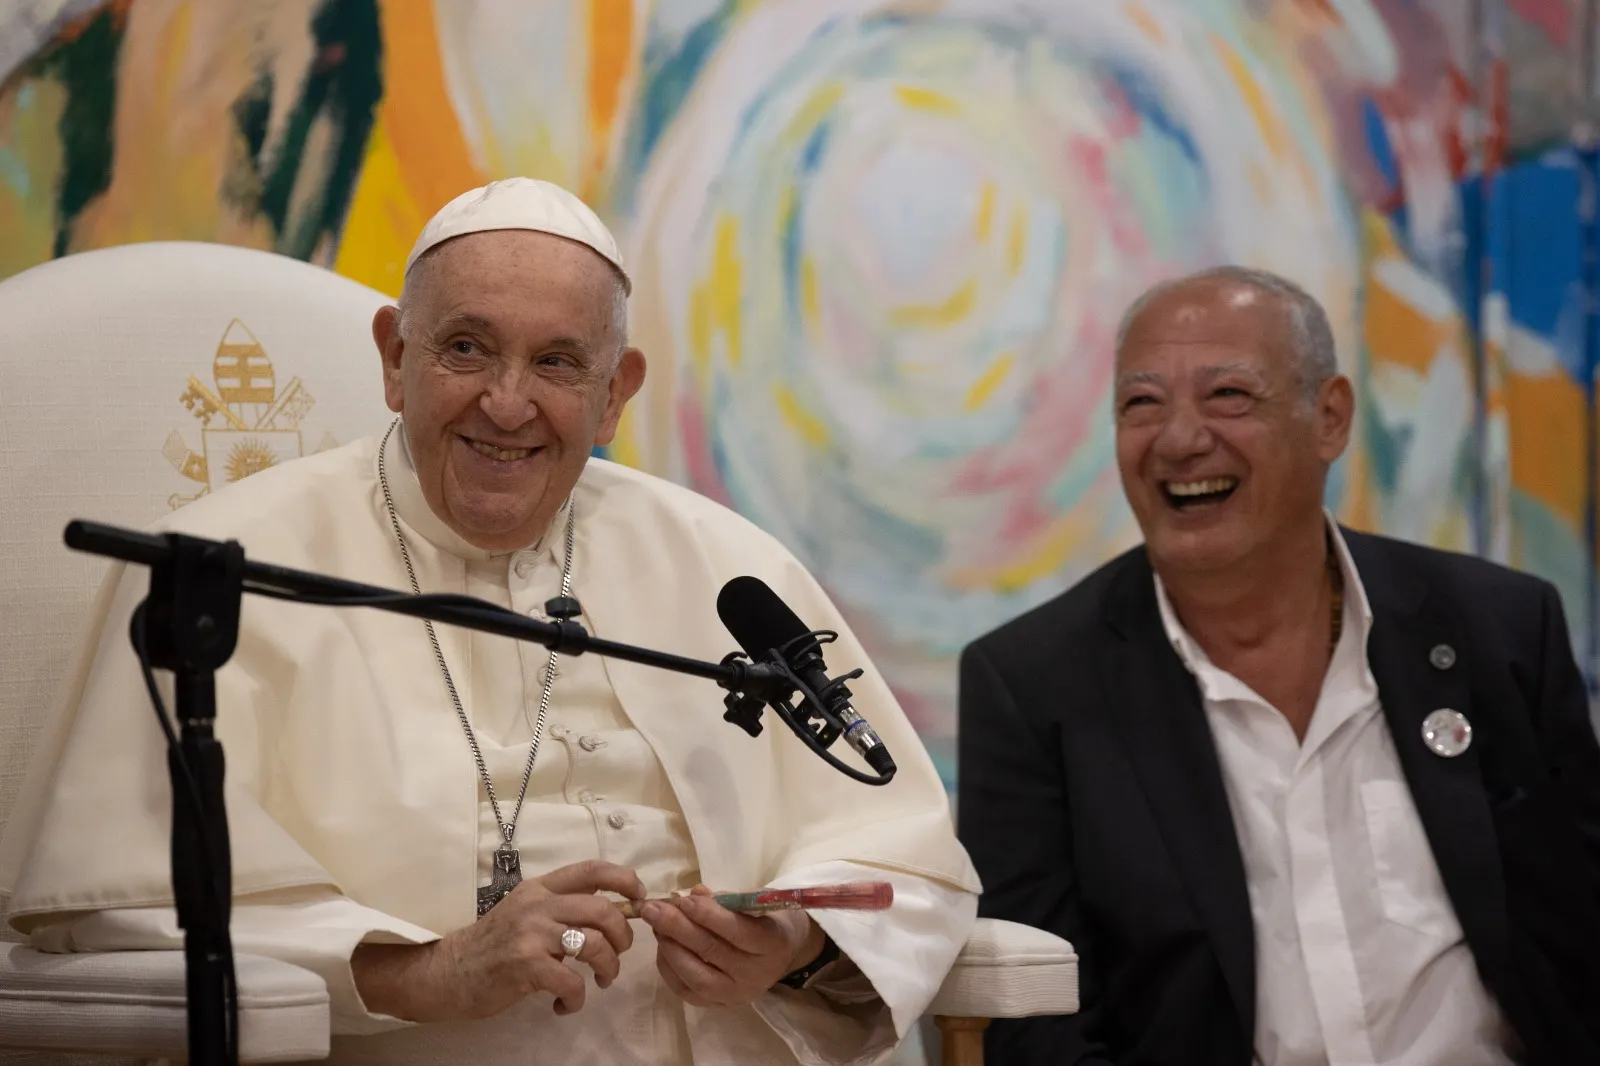 Pope Francis and José María Del Corral, president of the Scholas Occurrentes youth movement, smile during a meeting with the group's volunteers in Cascais, Portugal, on Aug. 3, 2023.?w=200&h=150